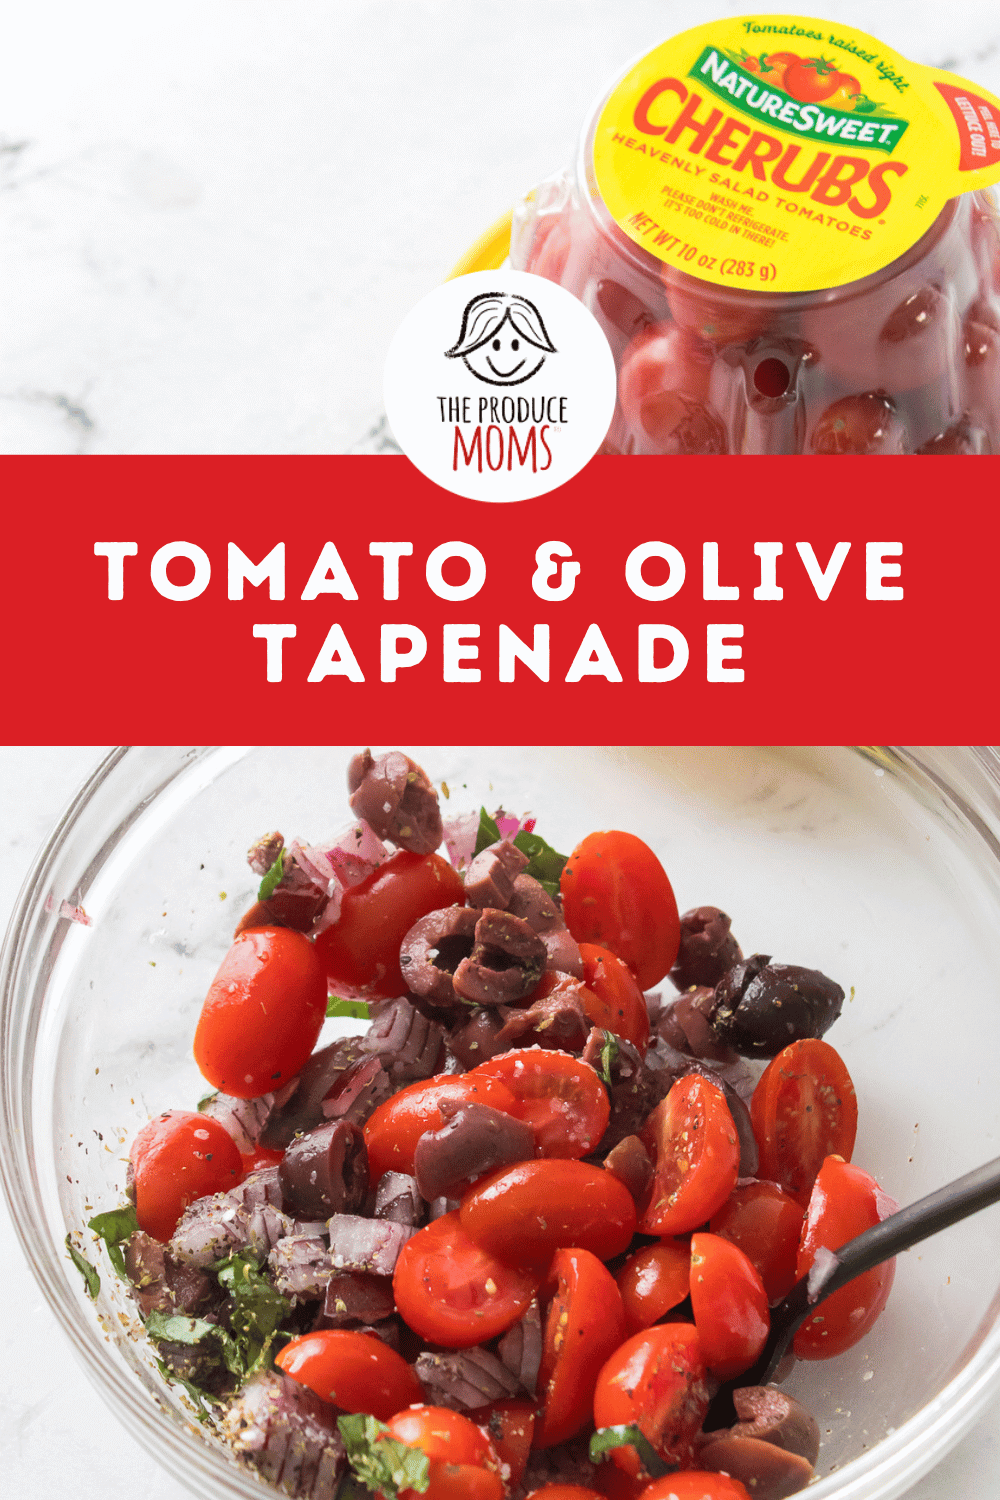 Pinterest Pin Tomato and Olive Tapenade